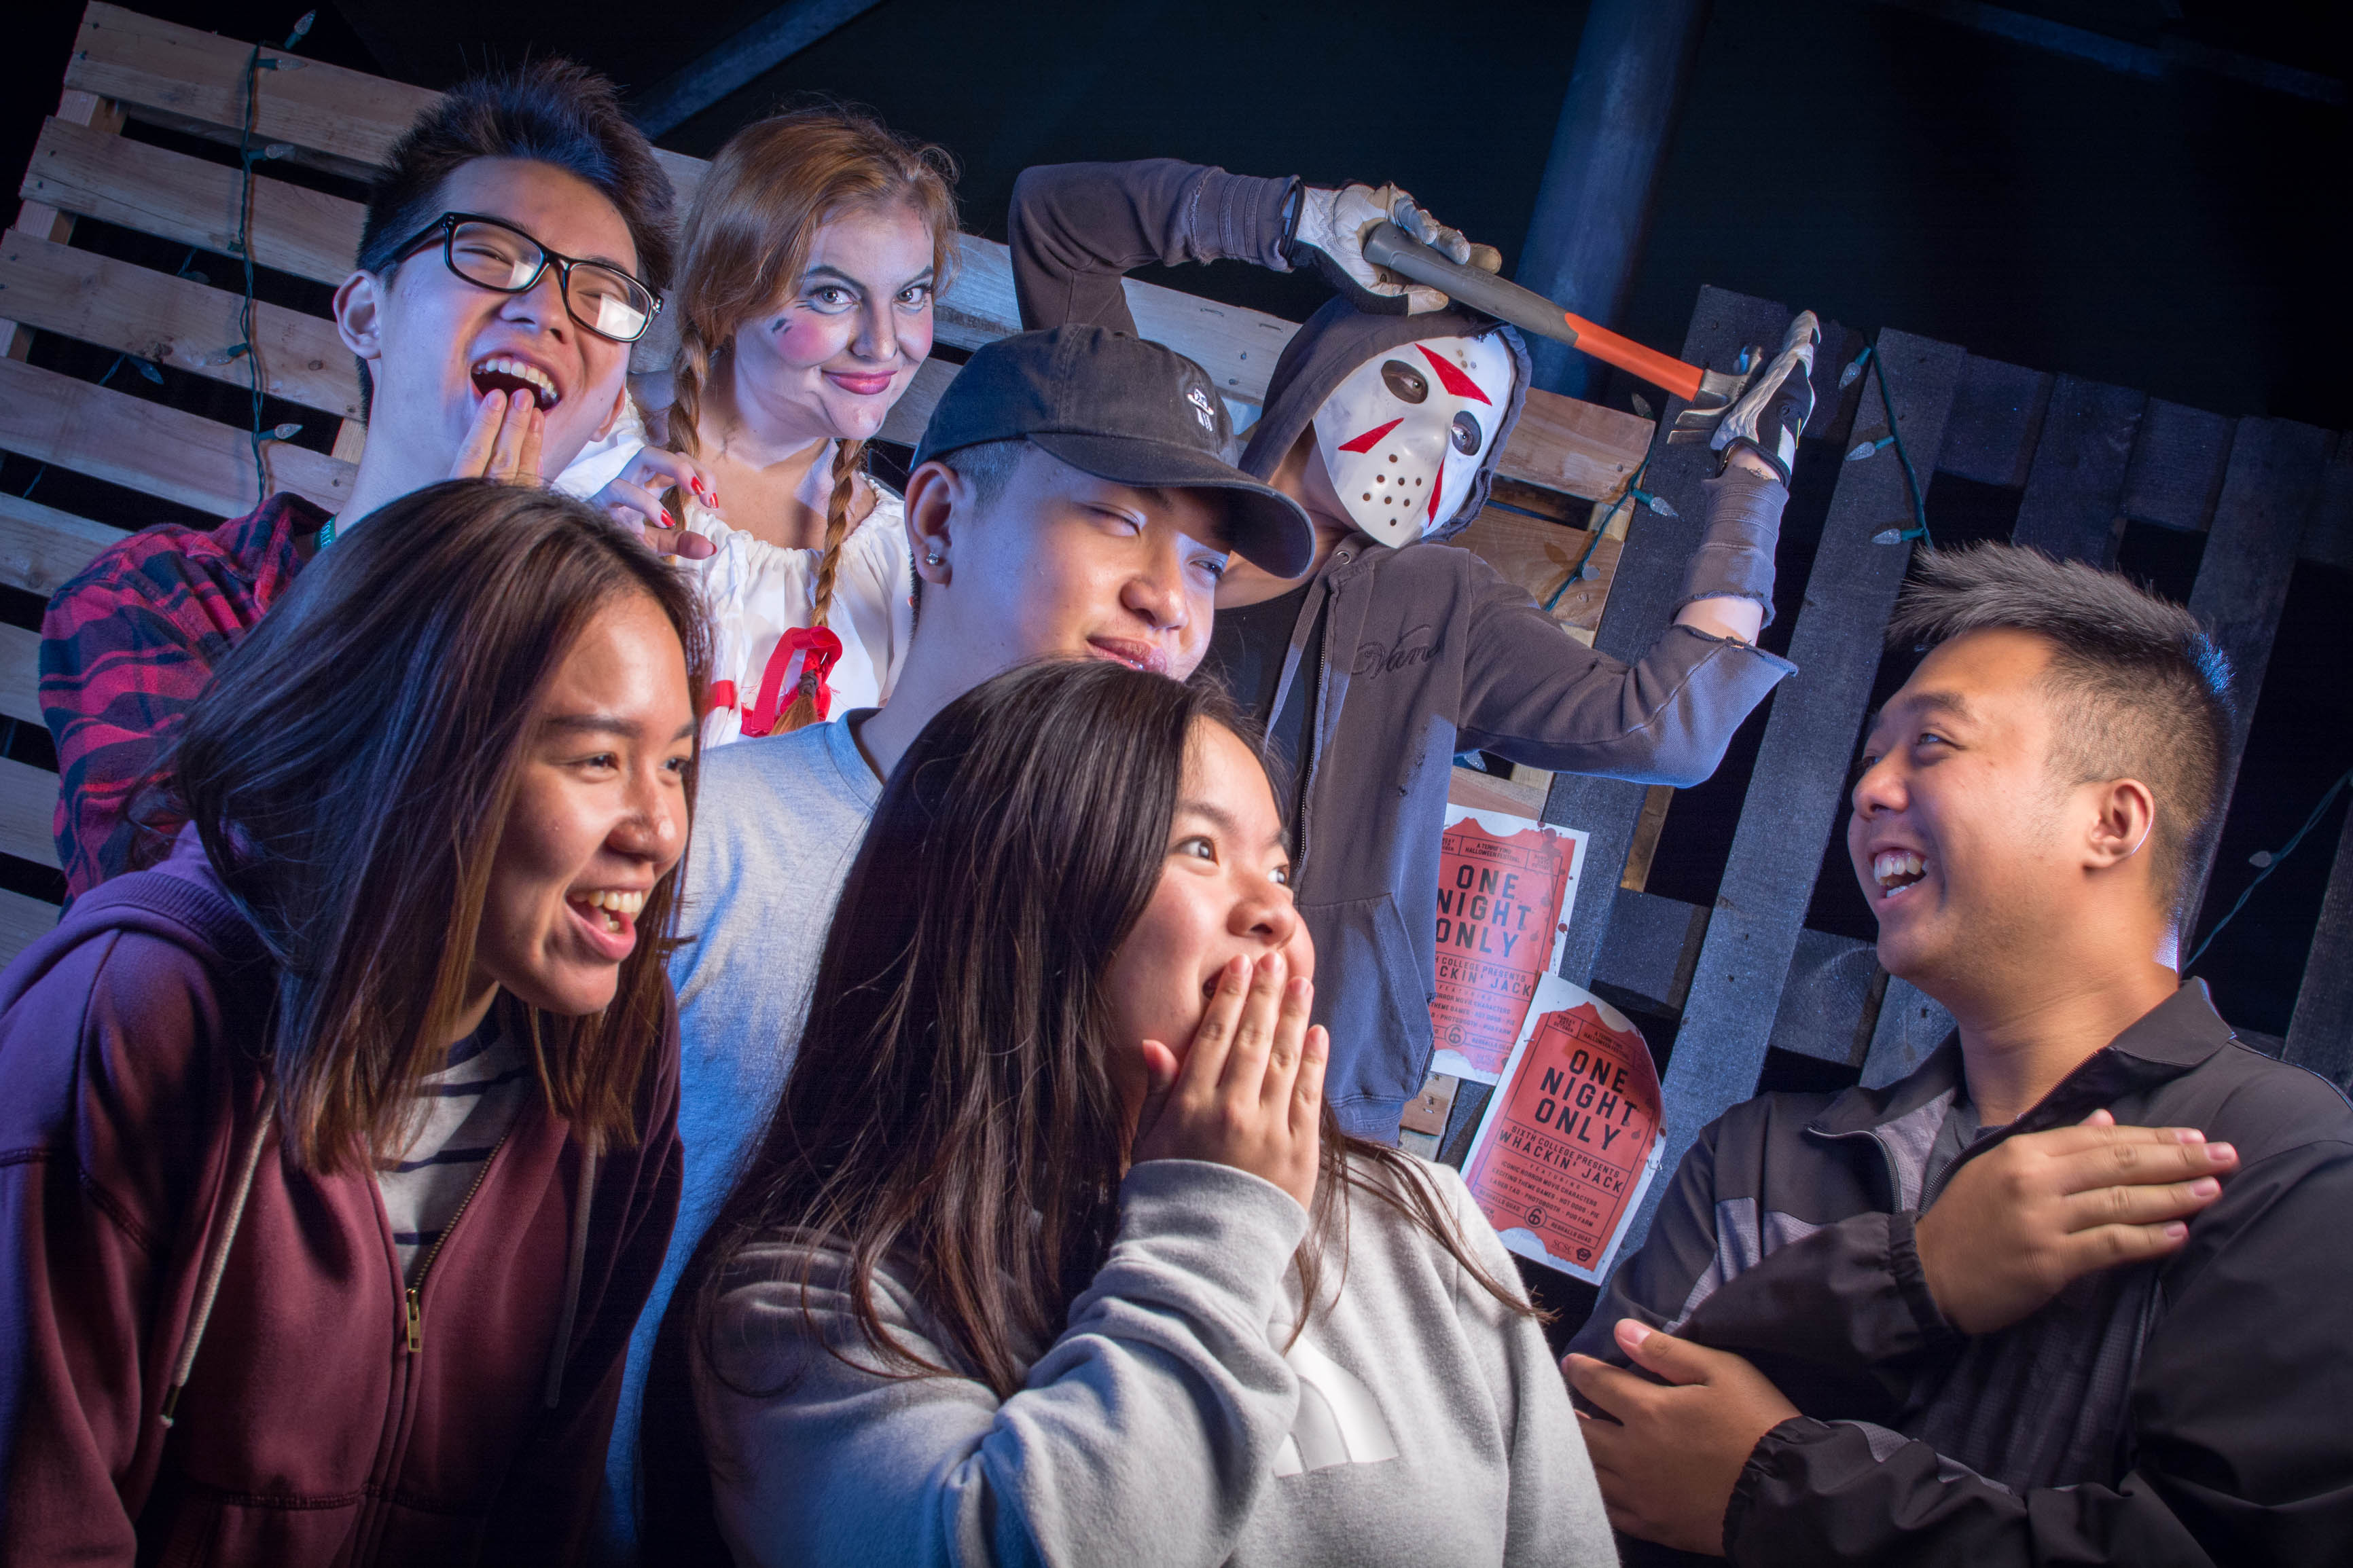 Students being scared by people in scary costumes